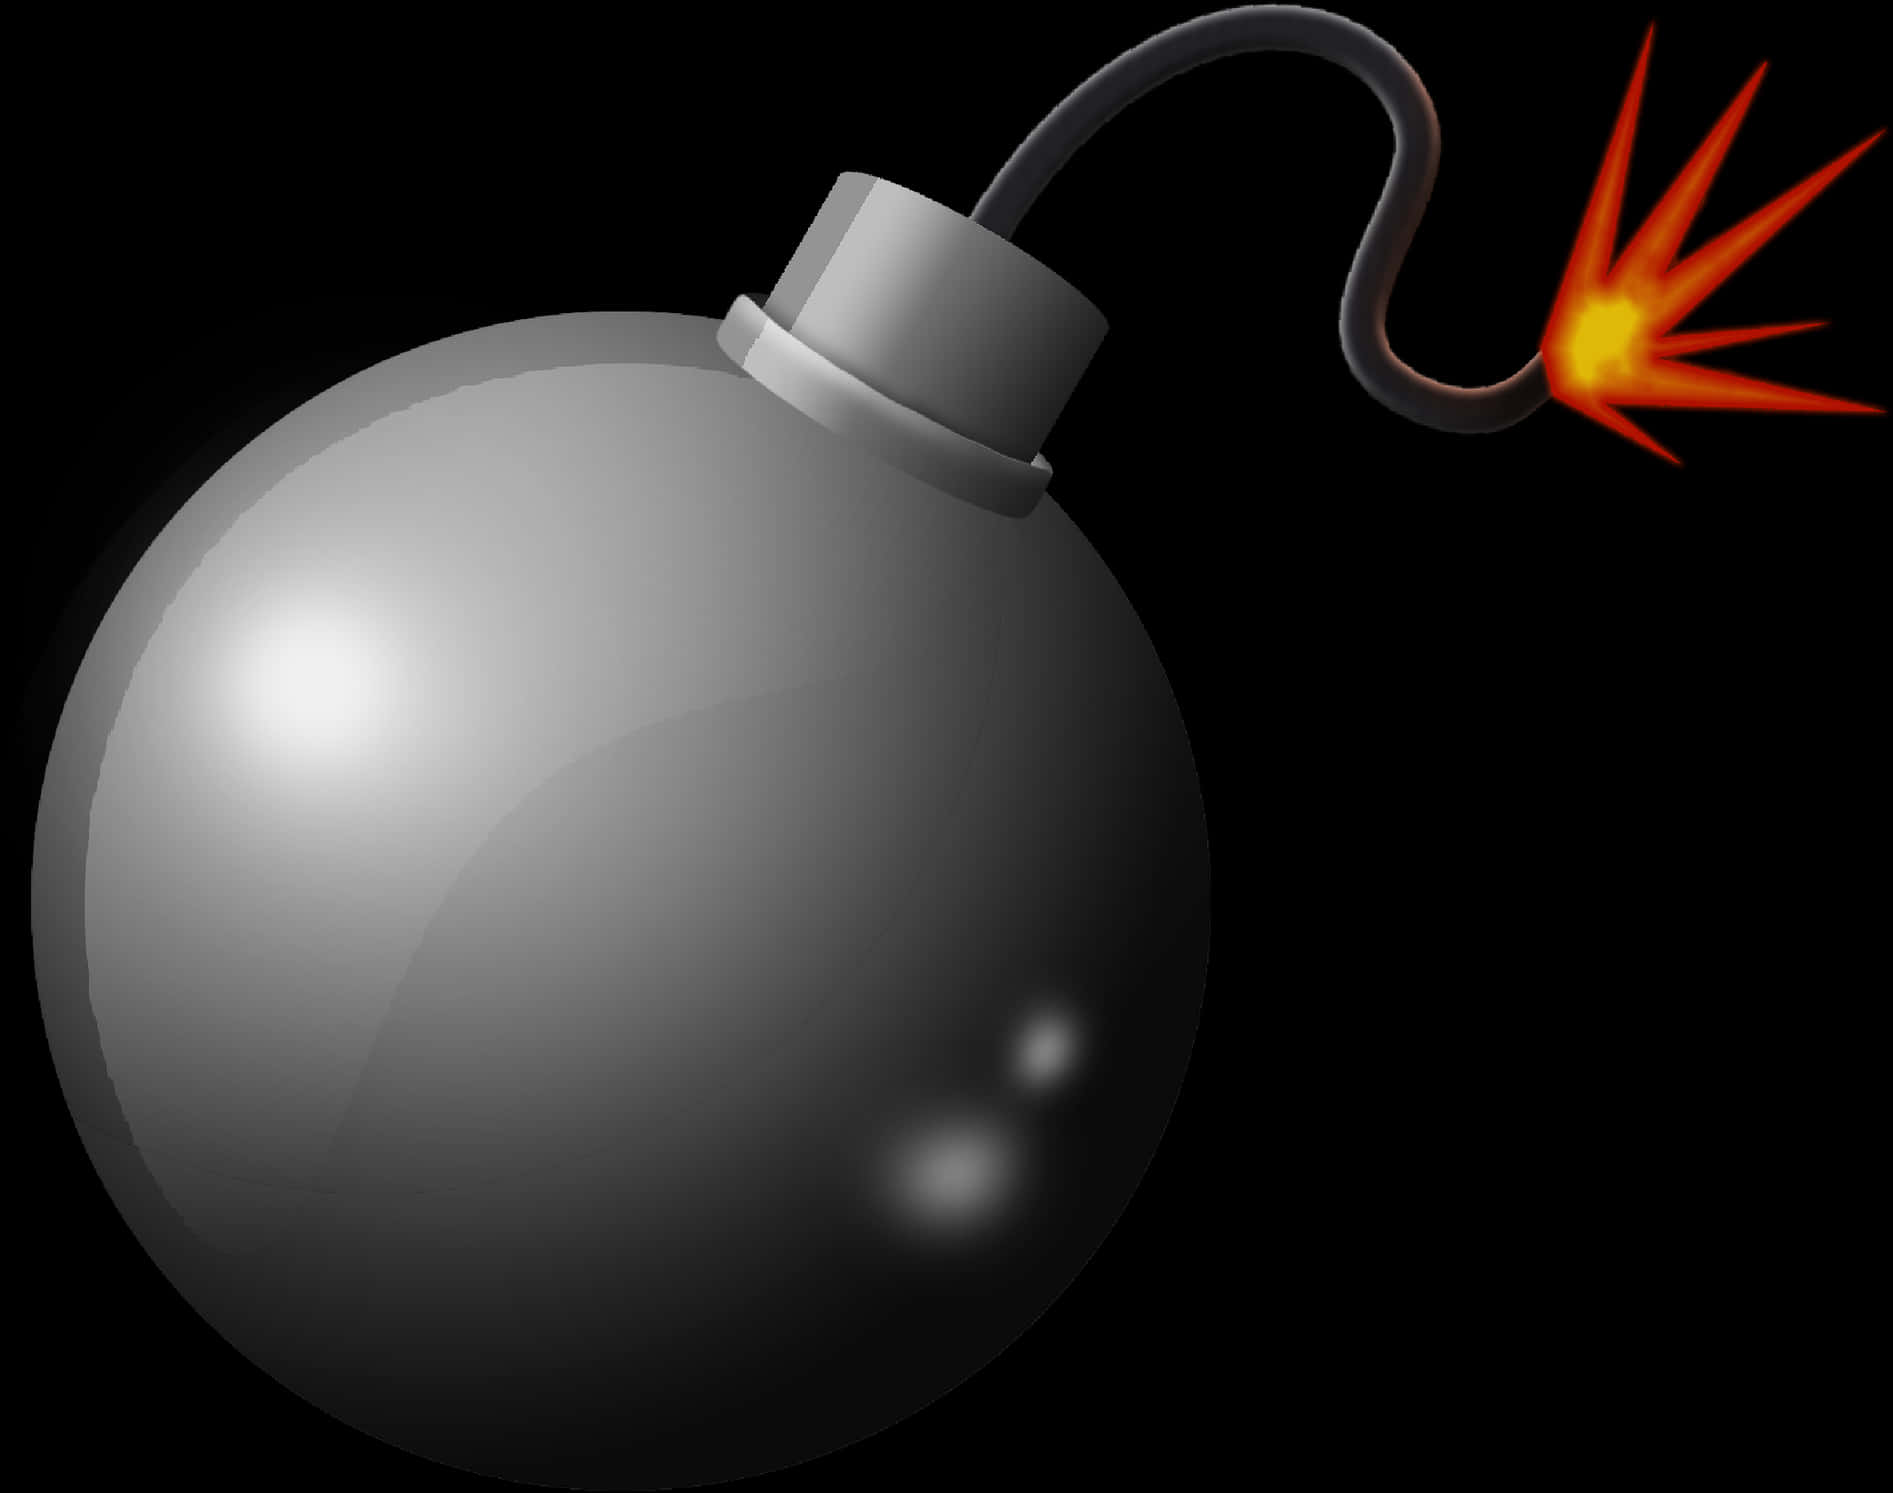 Classic Cartoon Bomb Ignition PNG